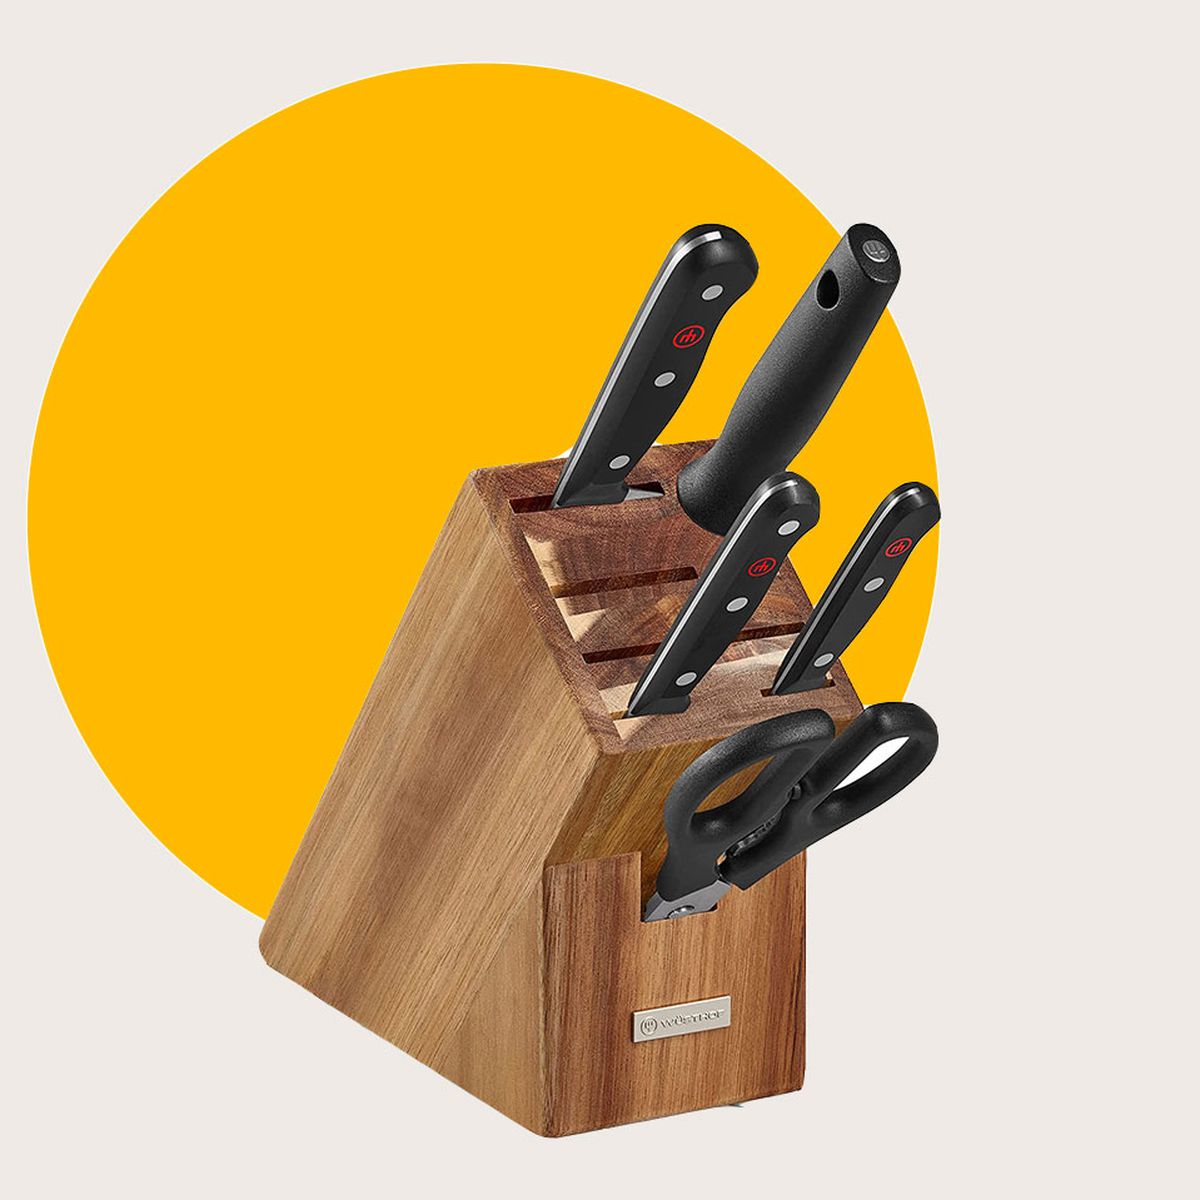 A knife block holding knives and a pair of scissors